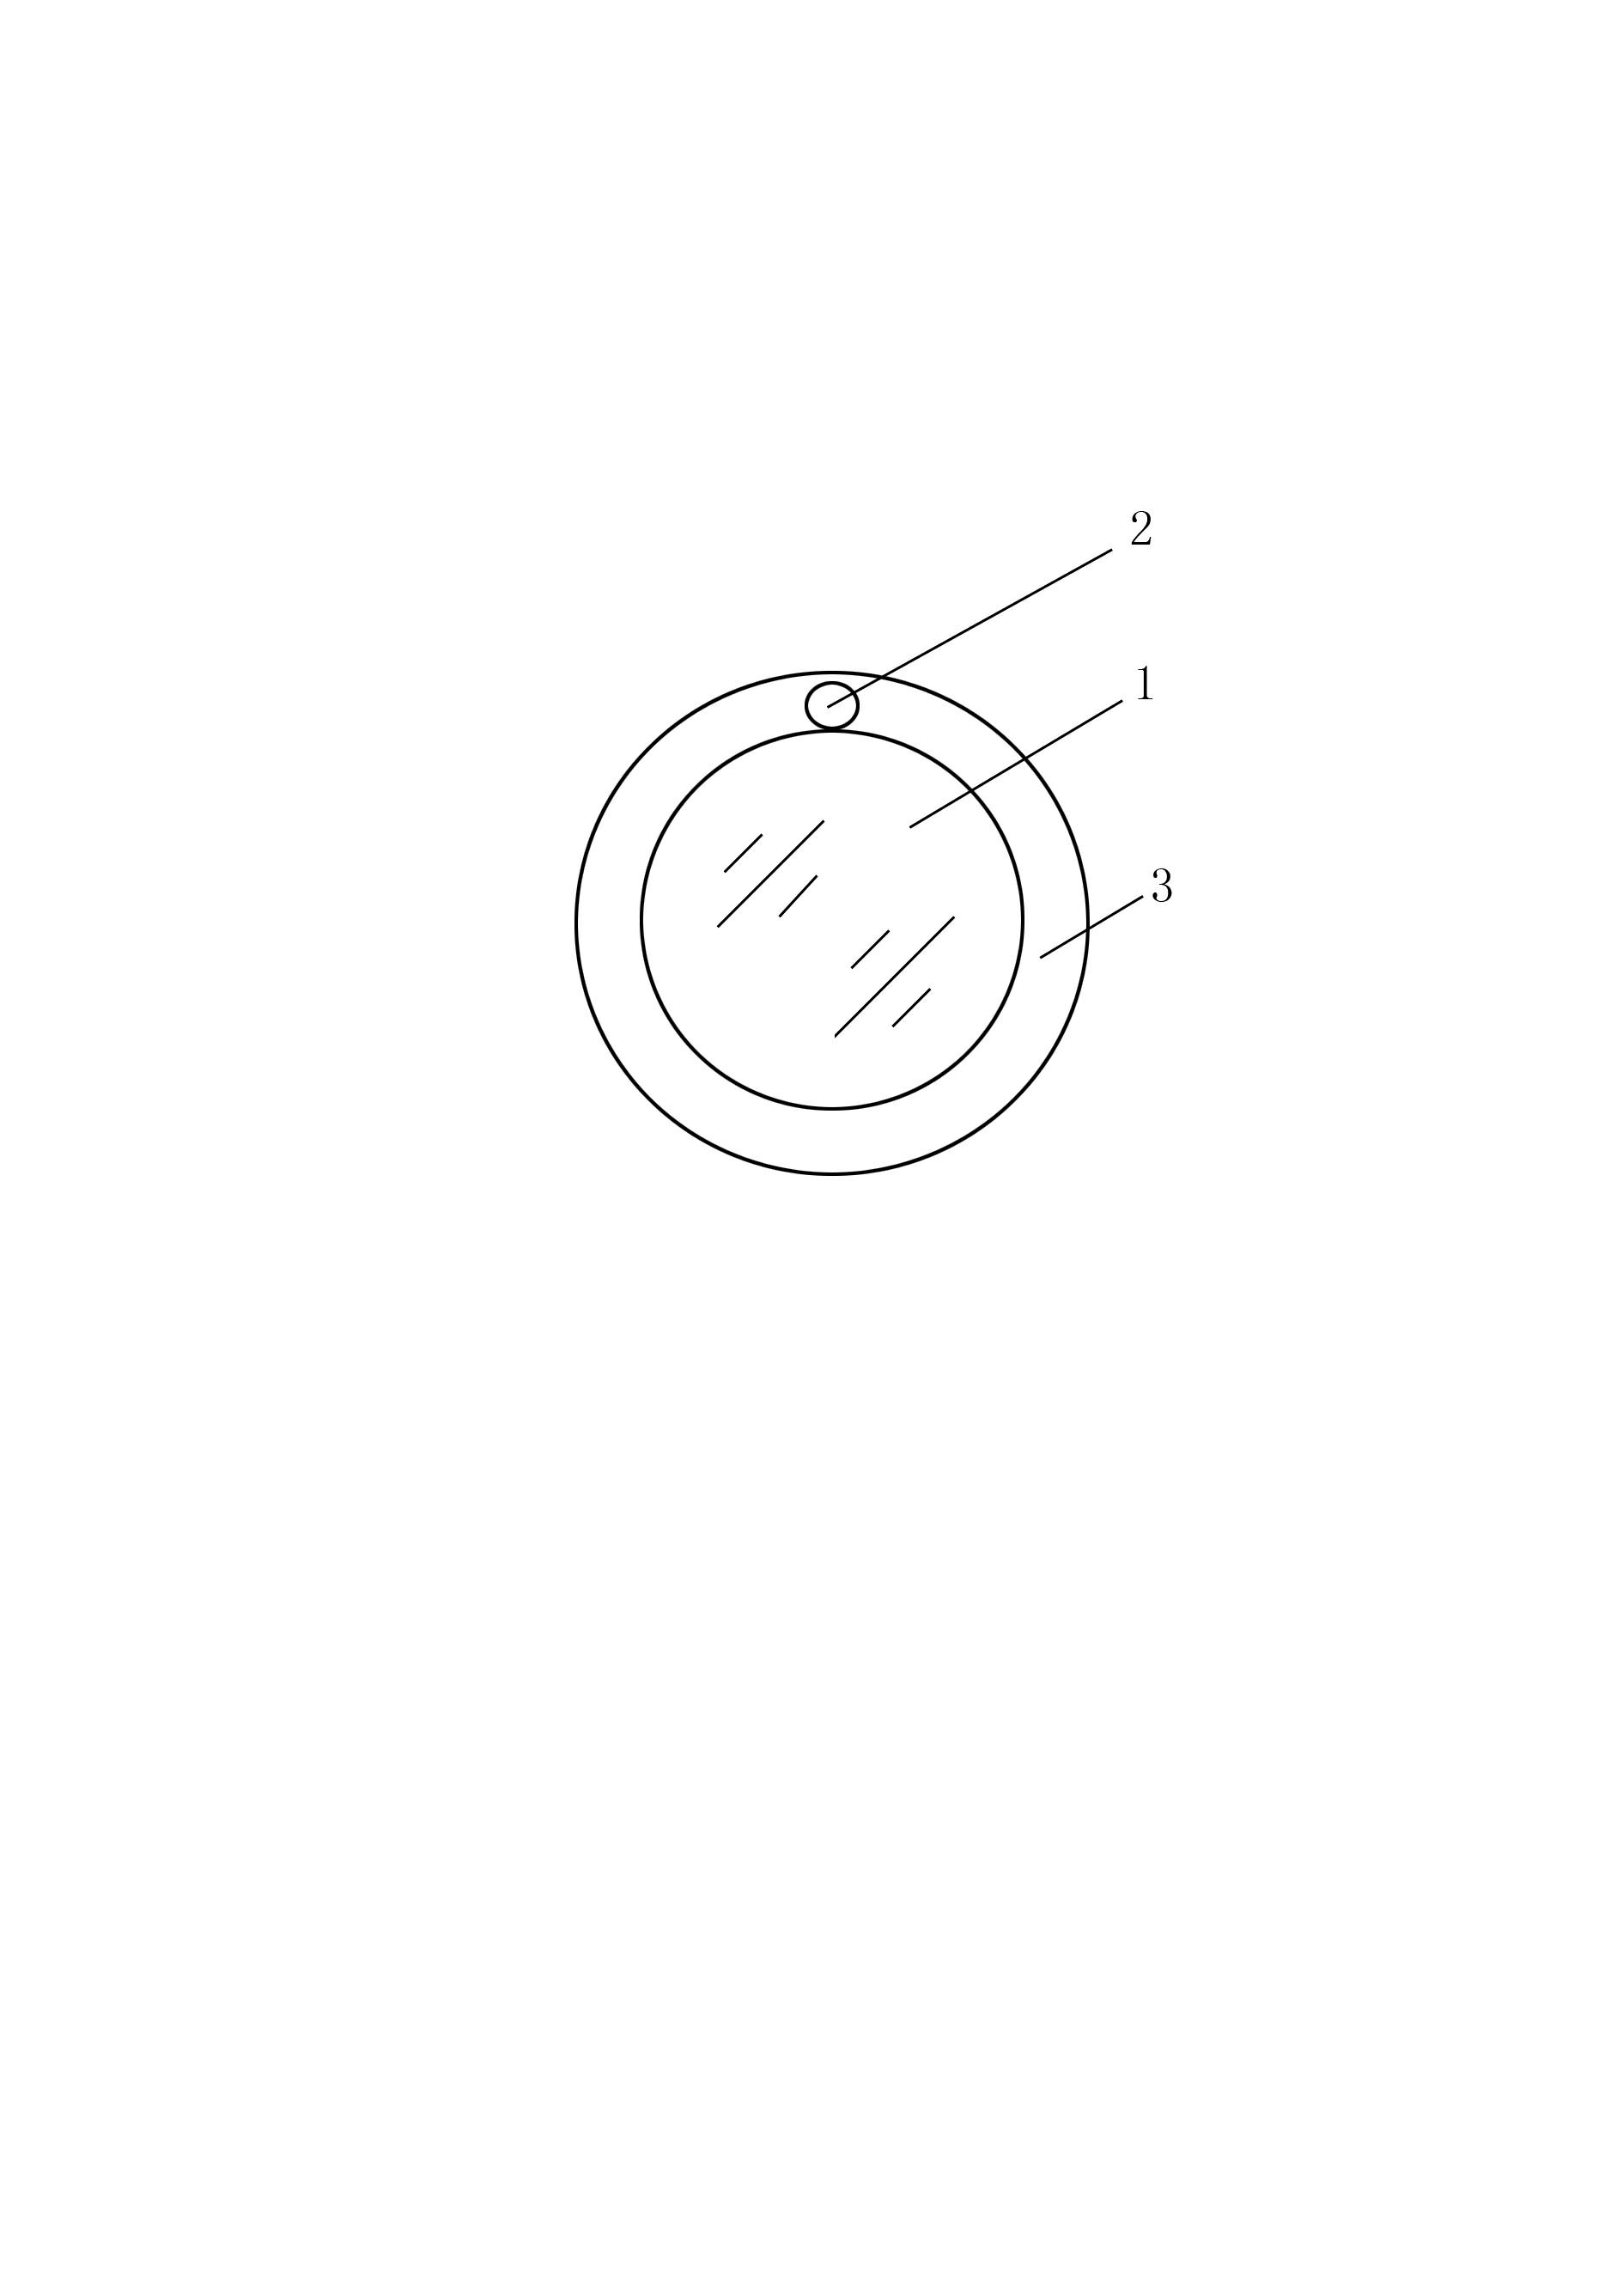 Endoscopic outer sleeve airbag with double hoses